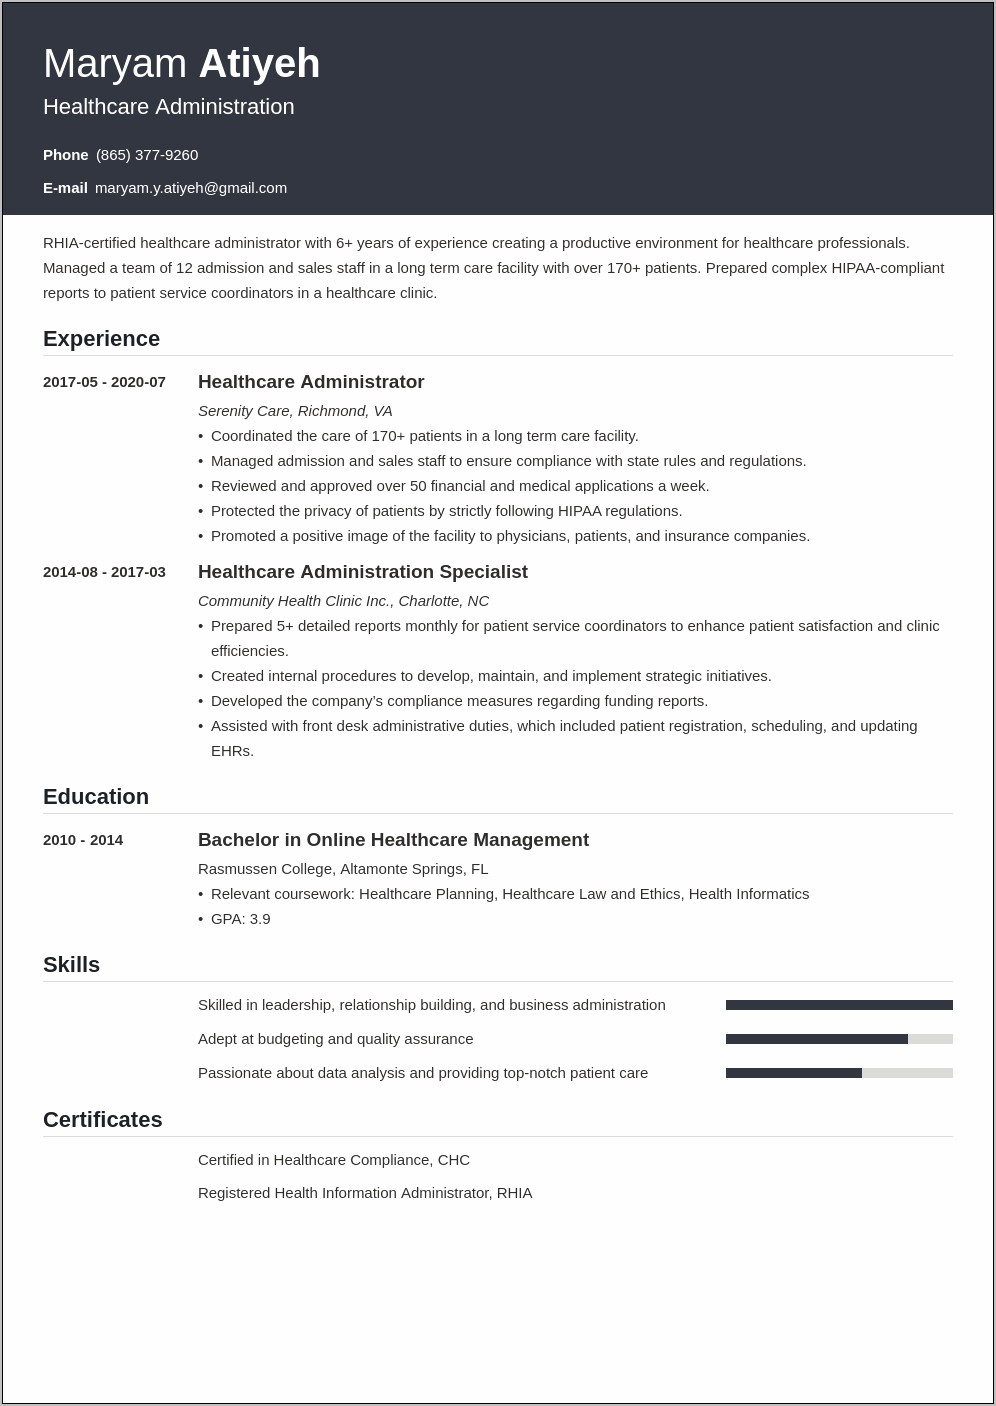 Resume Objective Examples For Healthcare Management